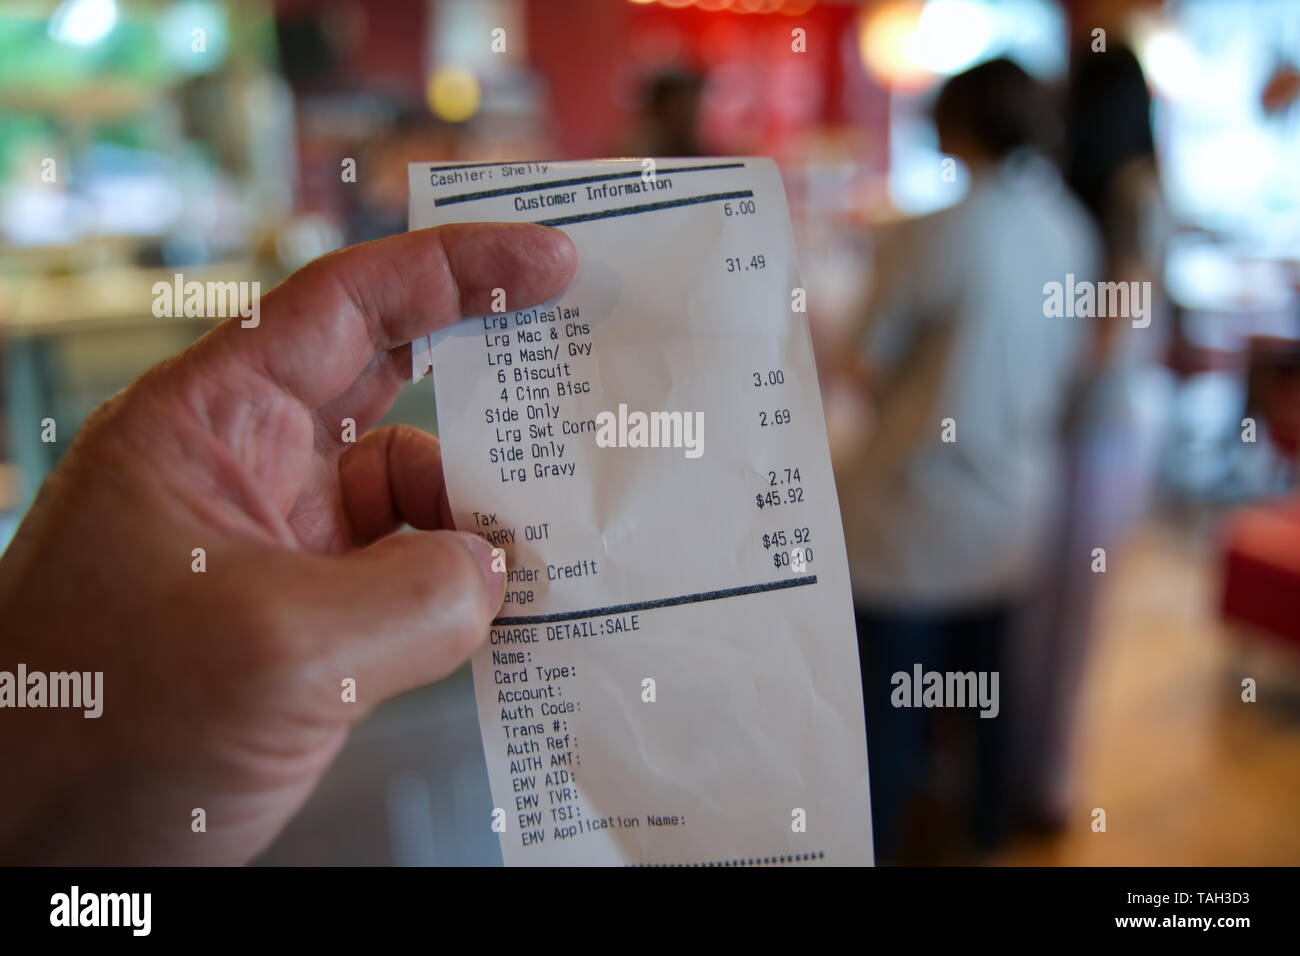 Checking the restaurant receipt for accuracy with young women customers in the background picking up their take out food. Stock Photo